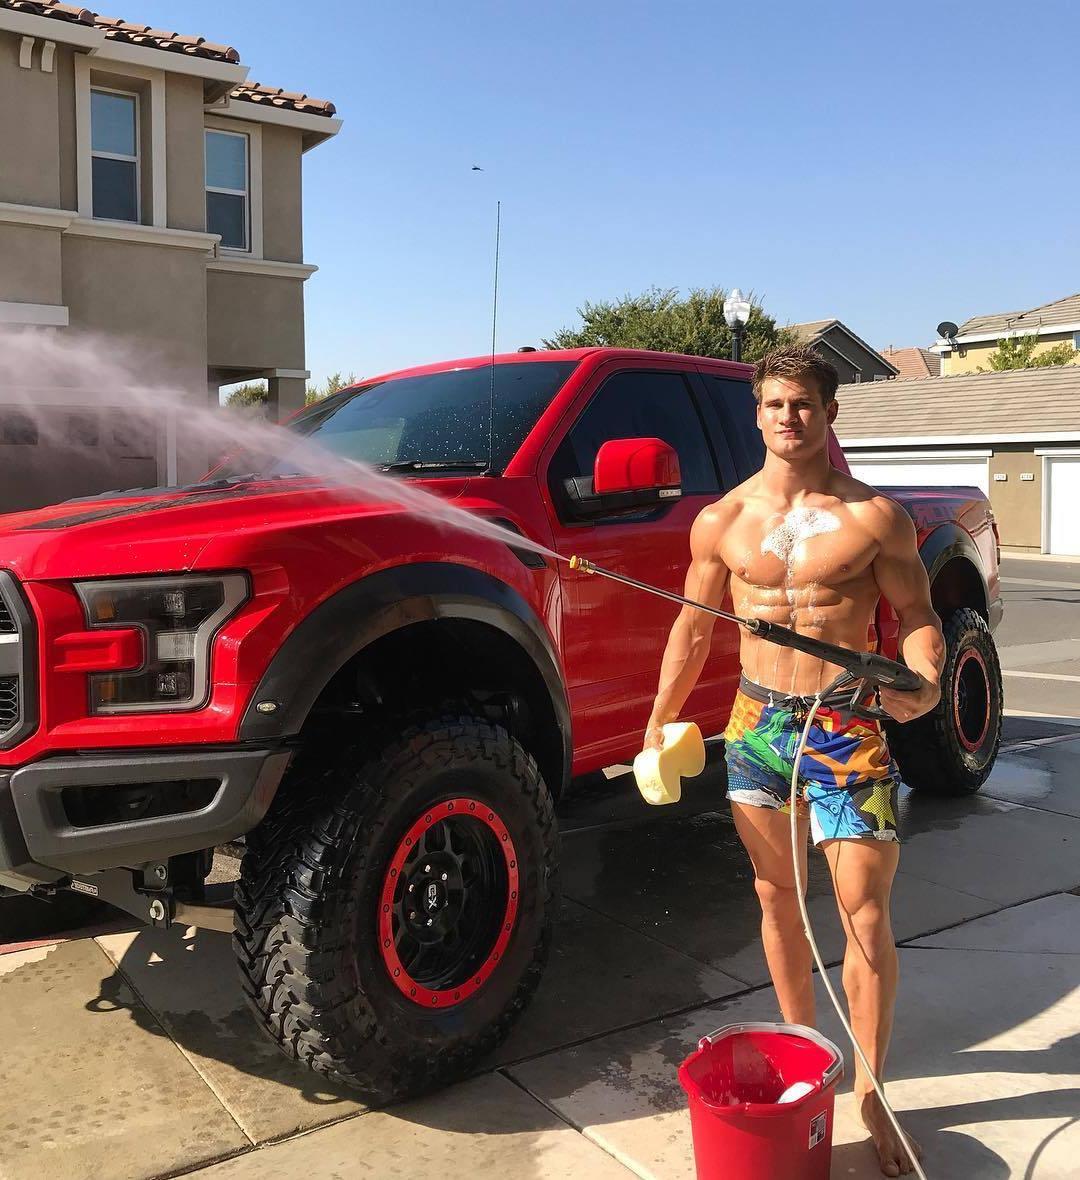 classic-american-bro-fit-shirtless-dude-sage-northcutt-cocky-young-jock-abs-wet-body-red-car-summer-cleaning